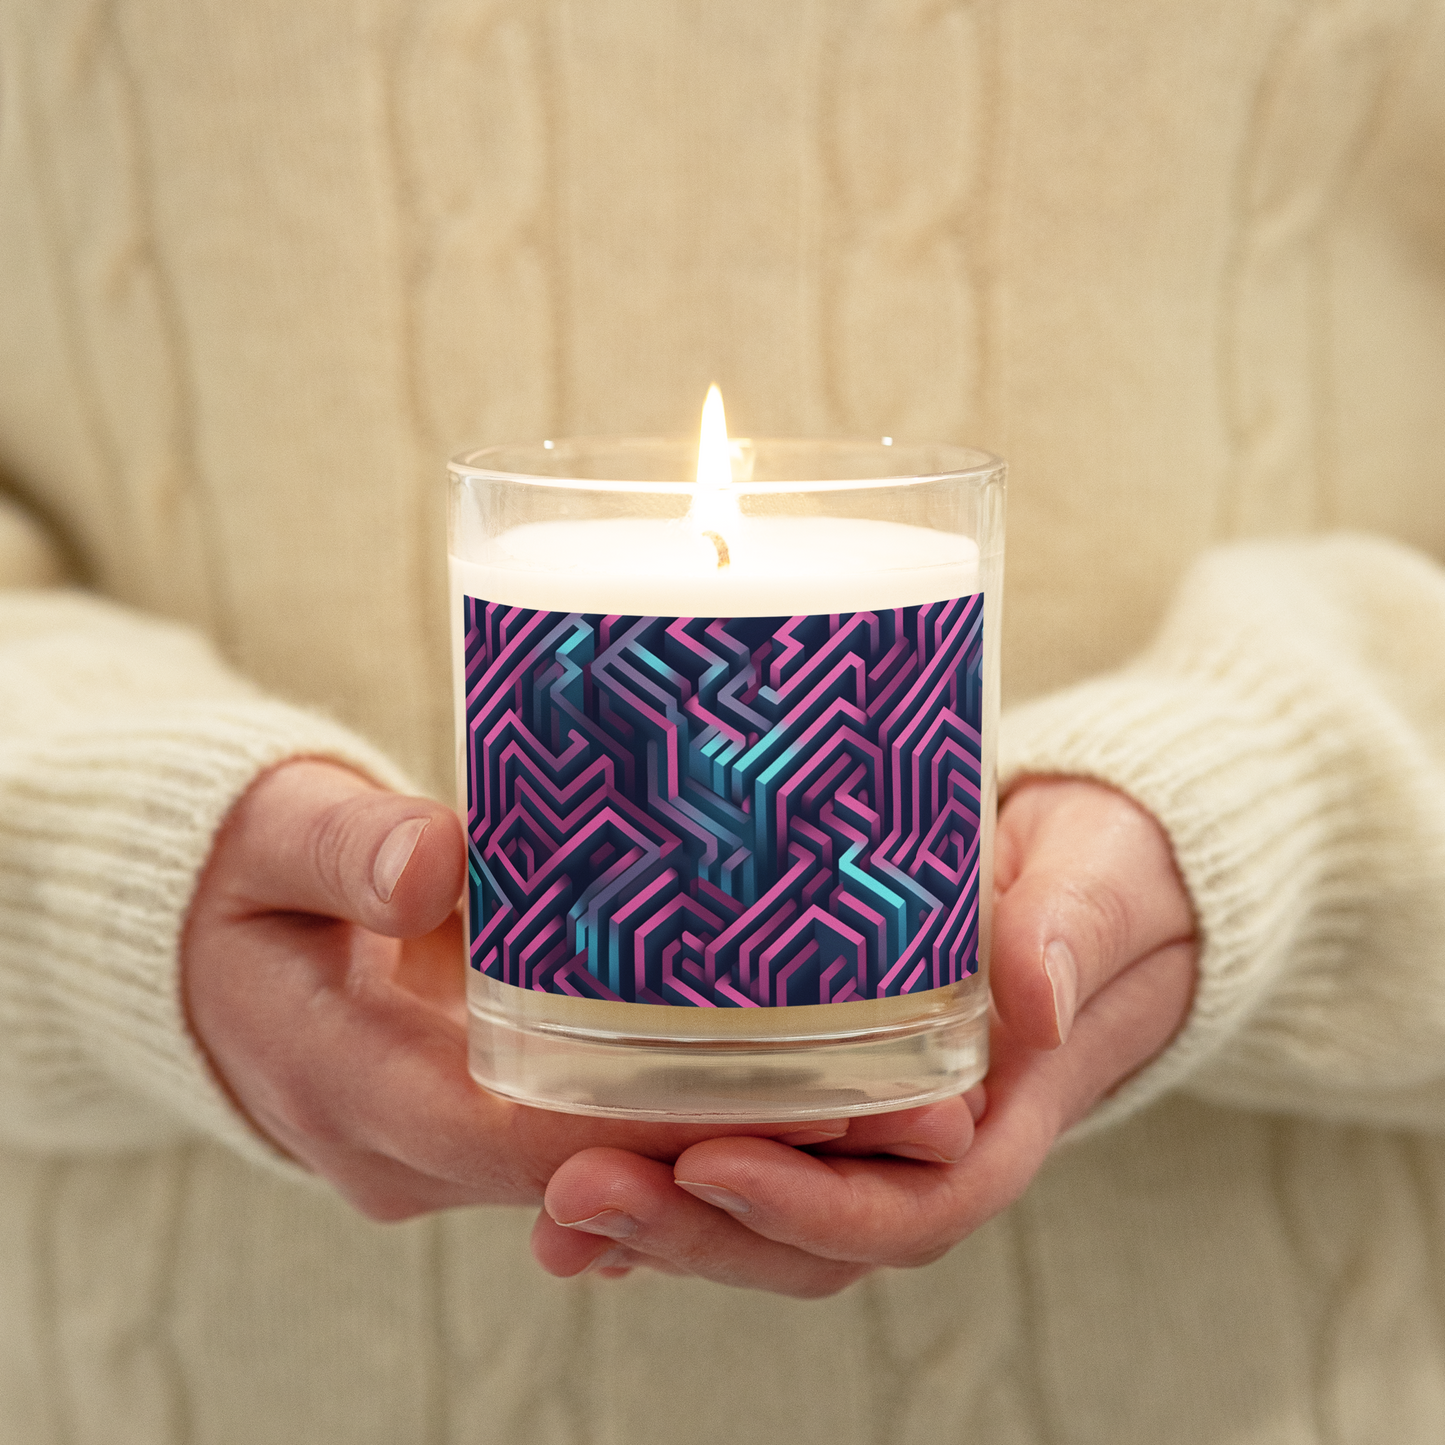 3D Maze Illusion | 3D Patterns | Glass Jar Soy Wax Candle - #4